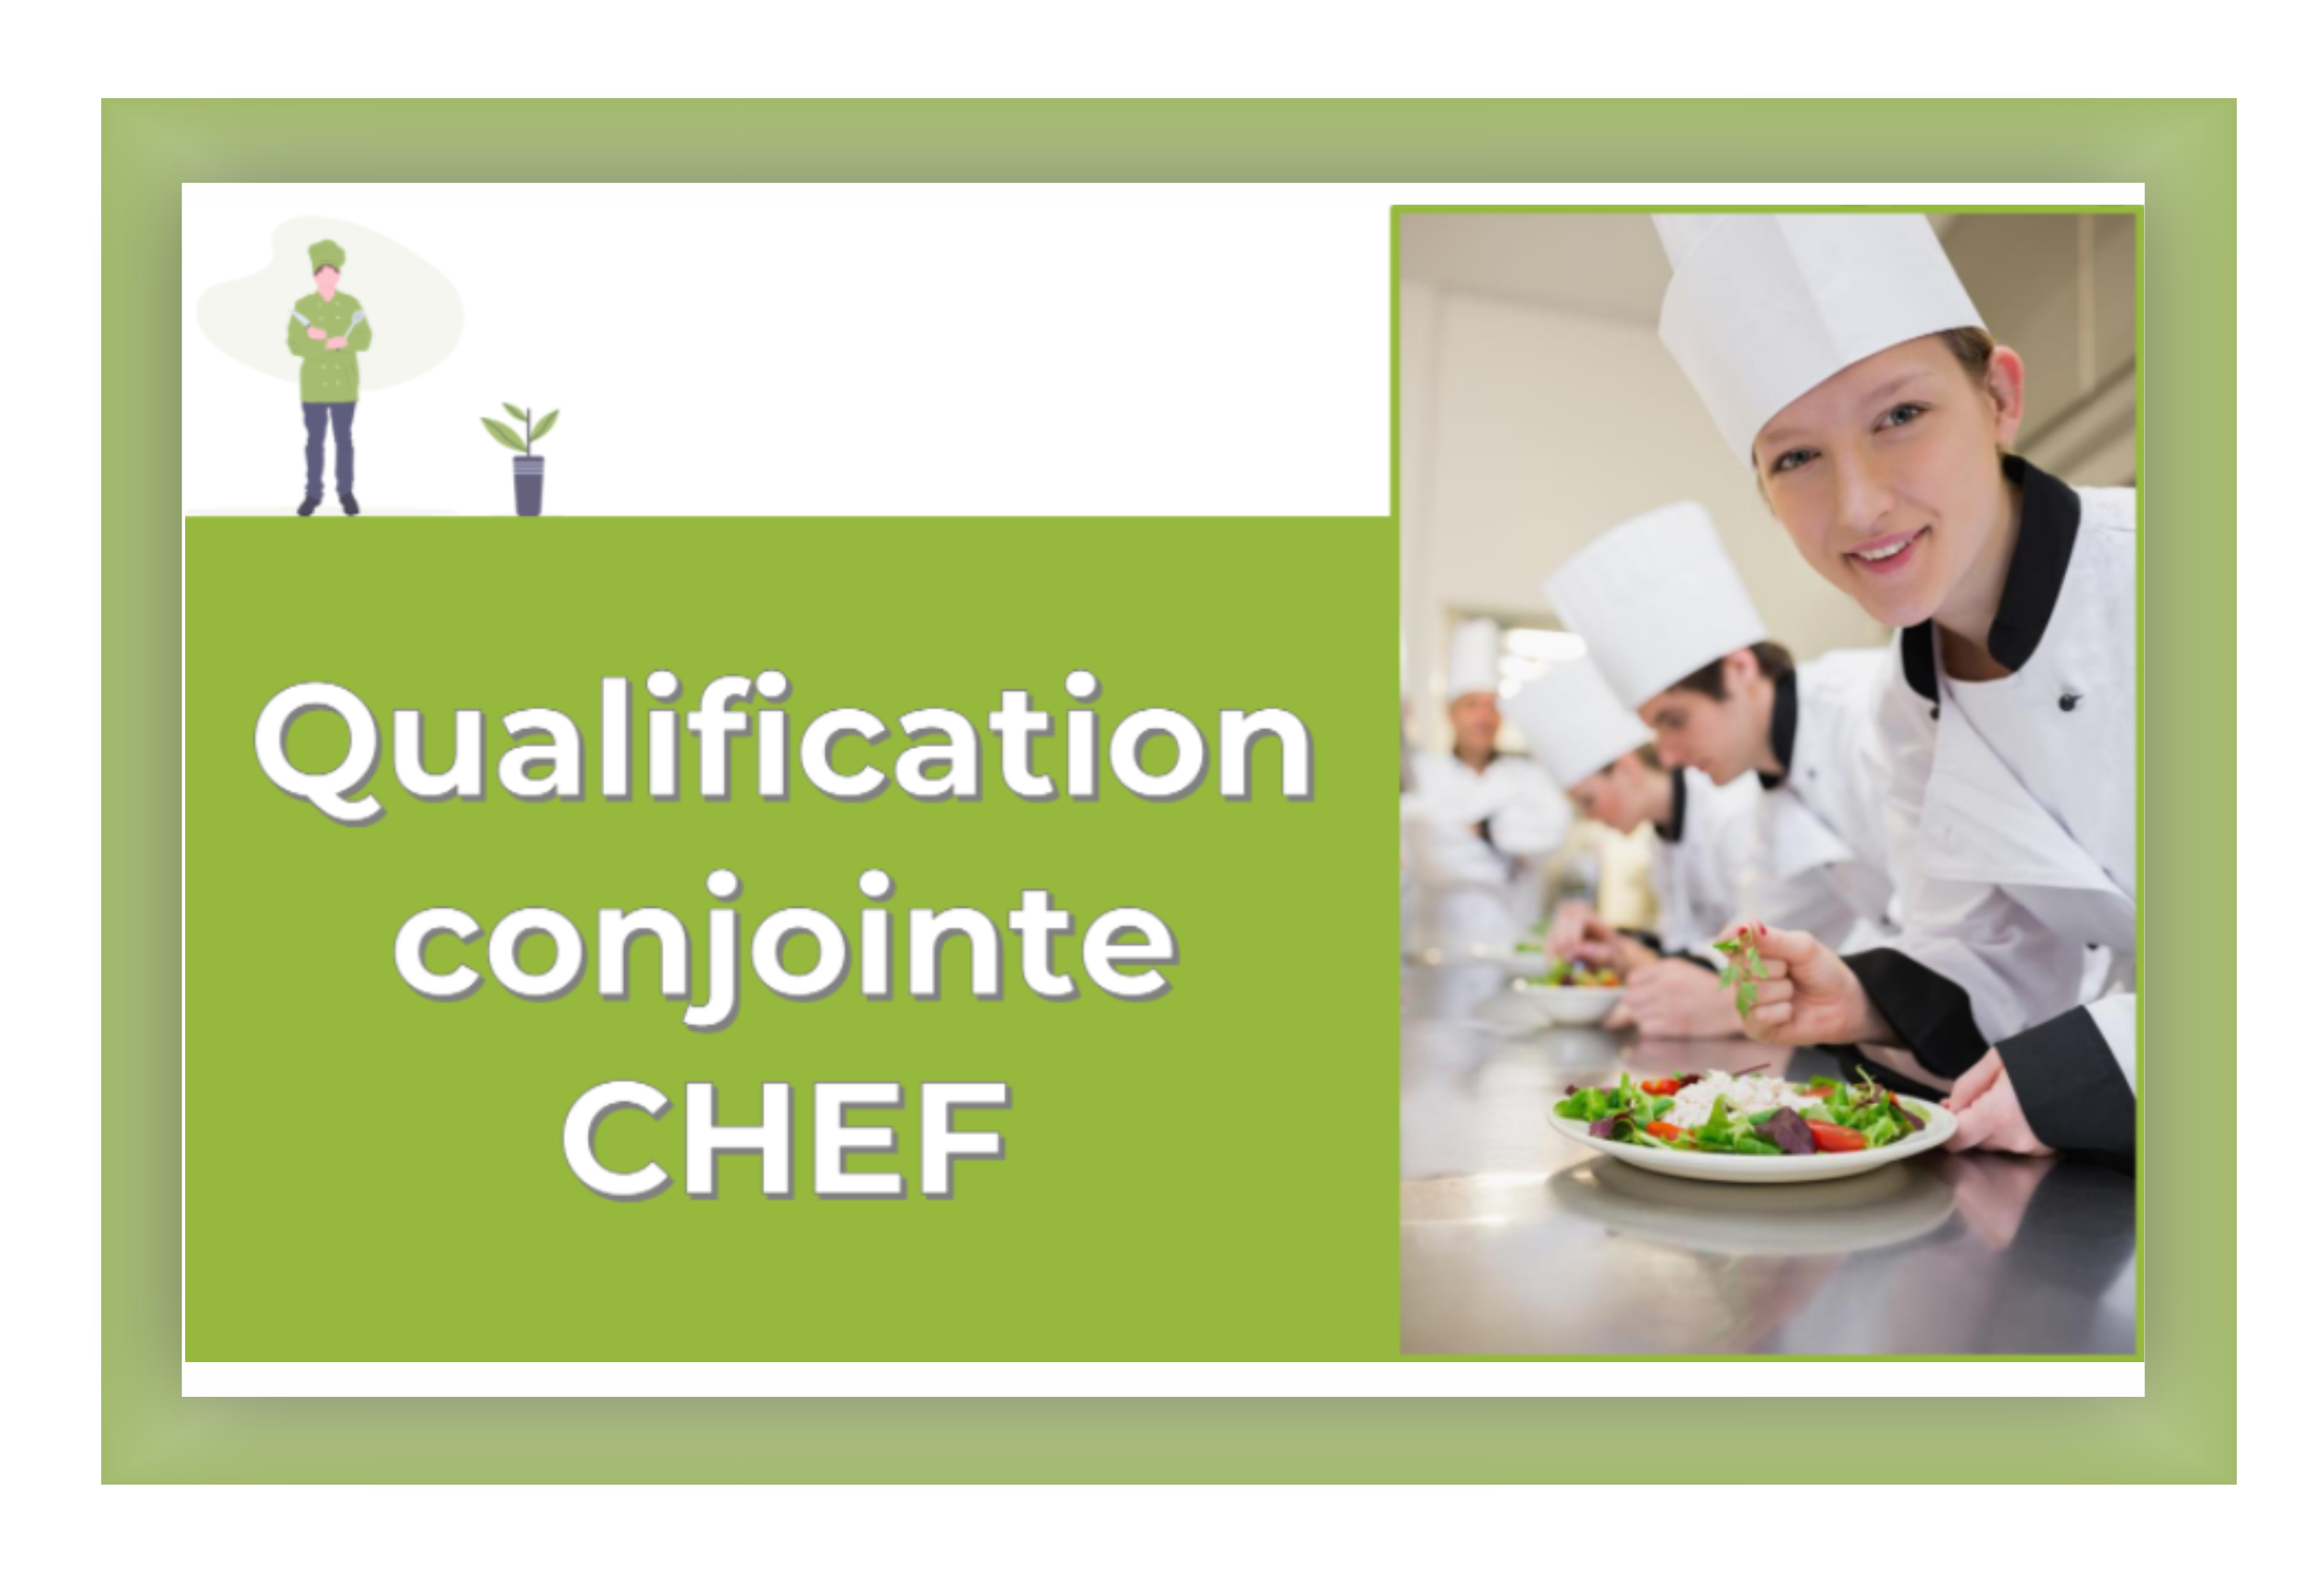 Qualification conjointe